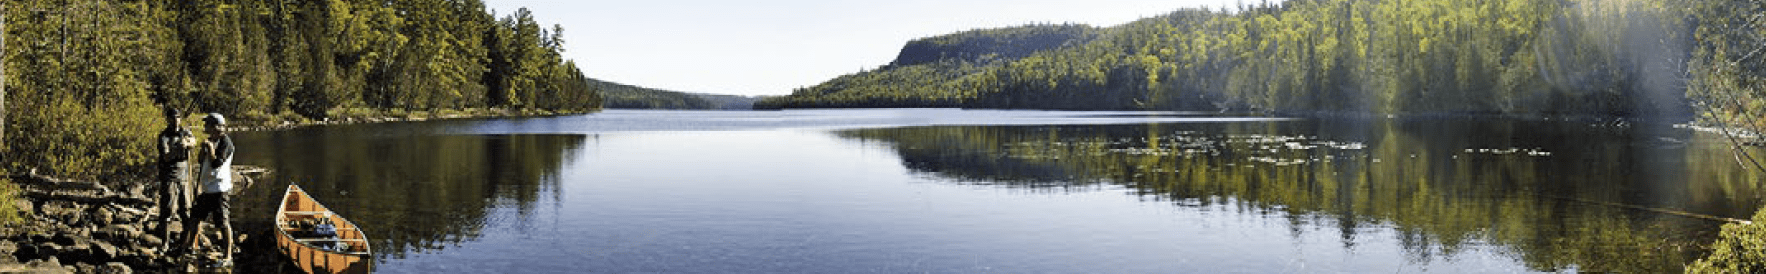 qsf-feature-coverphoto-top-stateofbwca